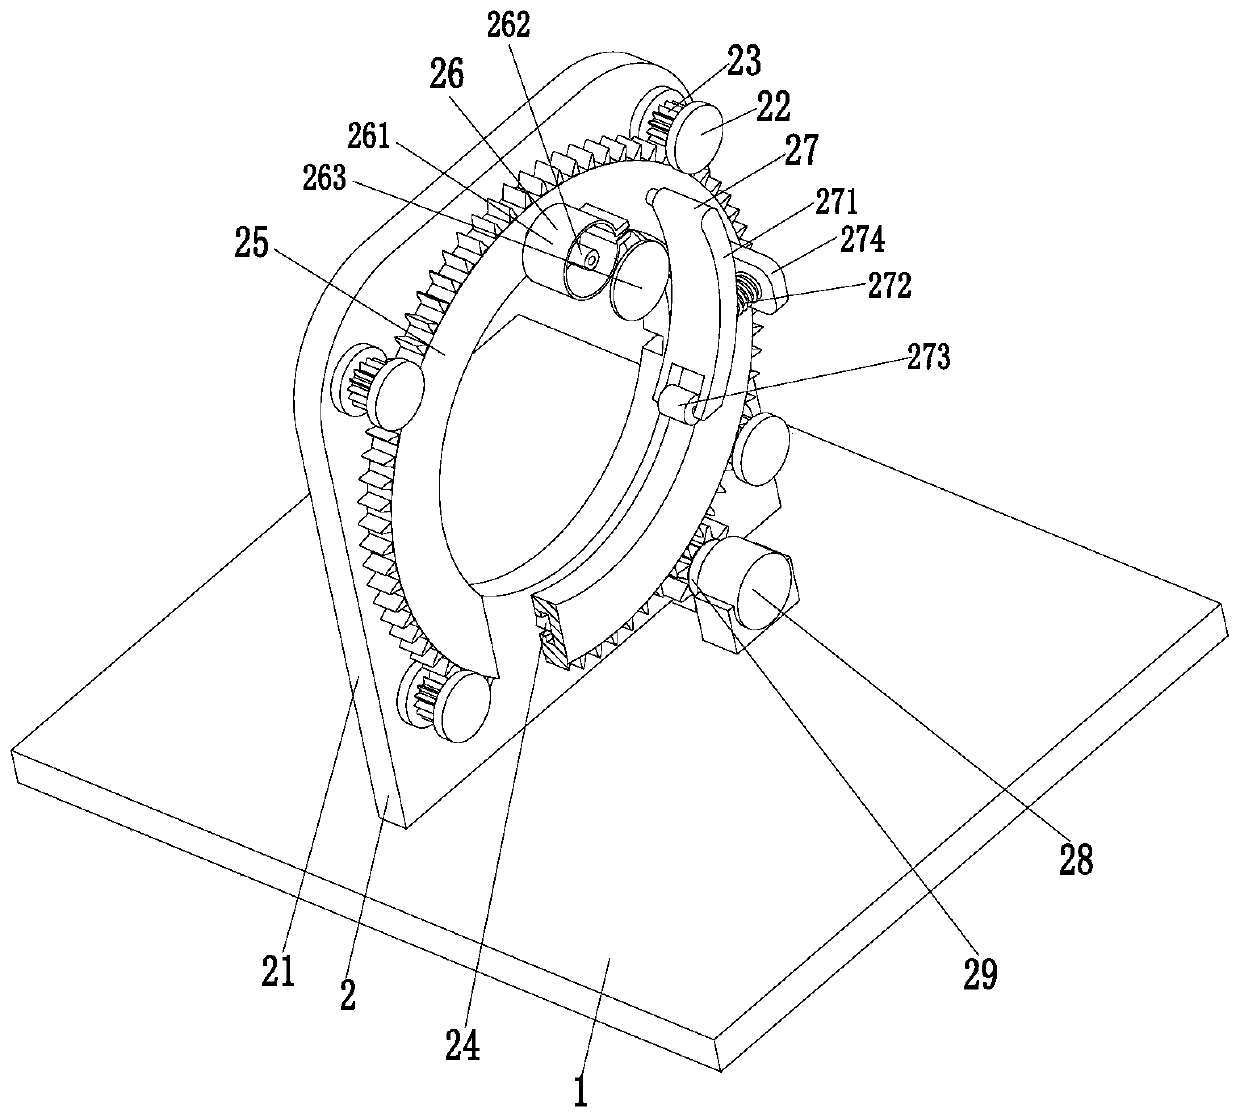 Auxiliary winding device for umbilical cord nursing gauze